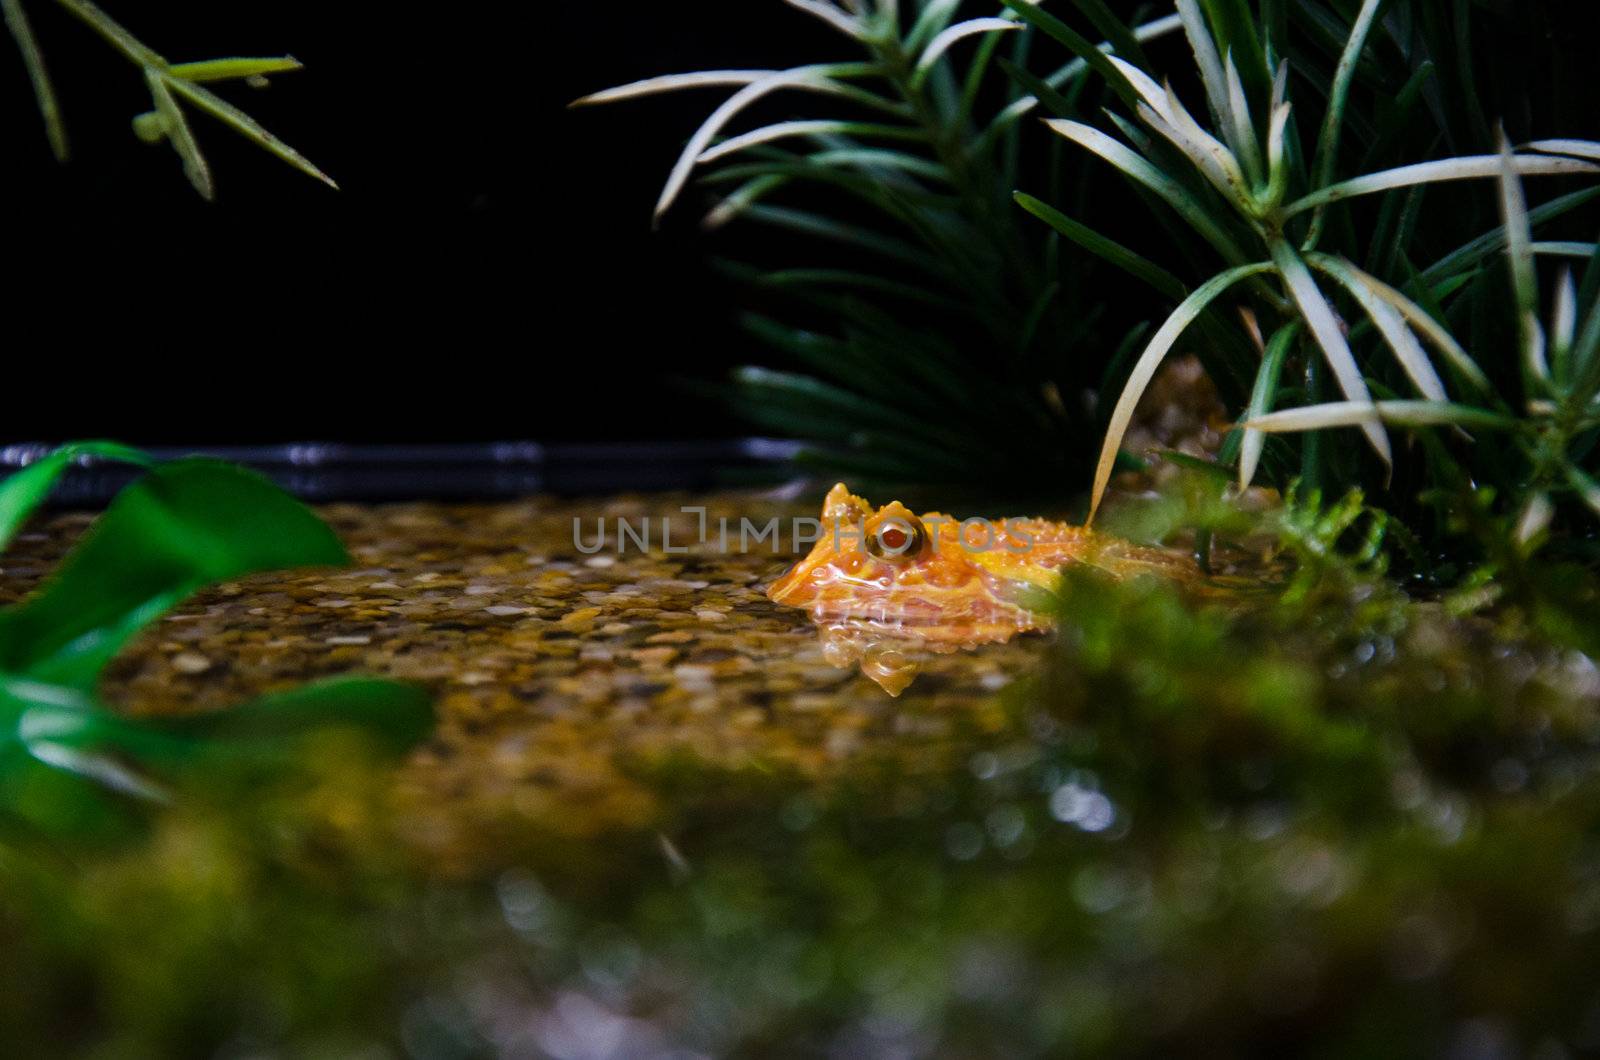 Toad in the pond by chatchai